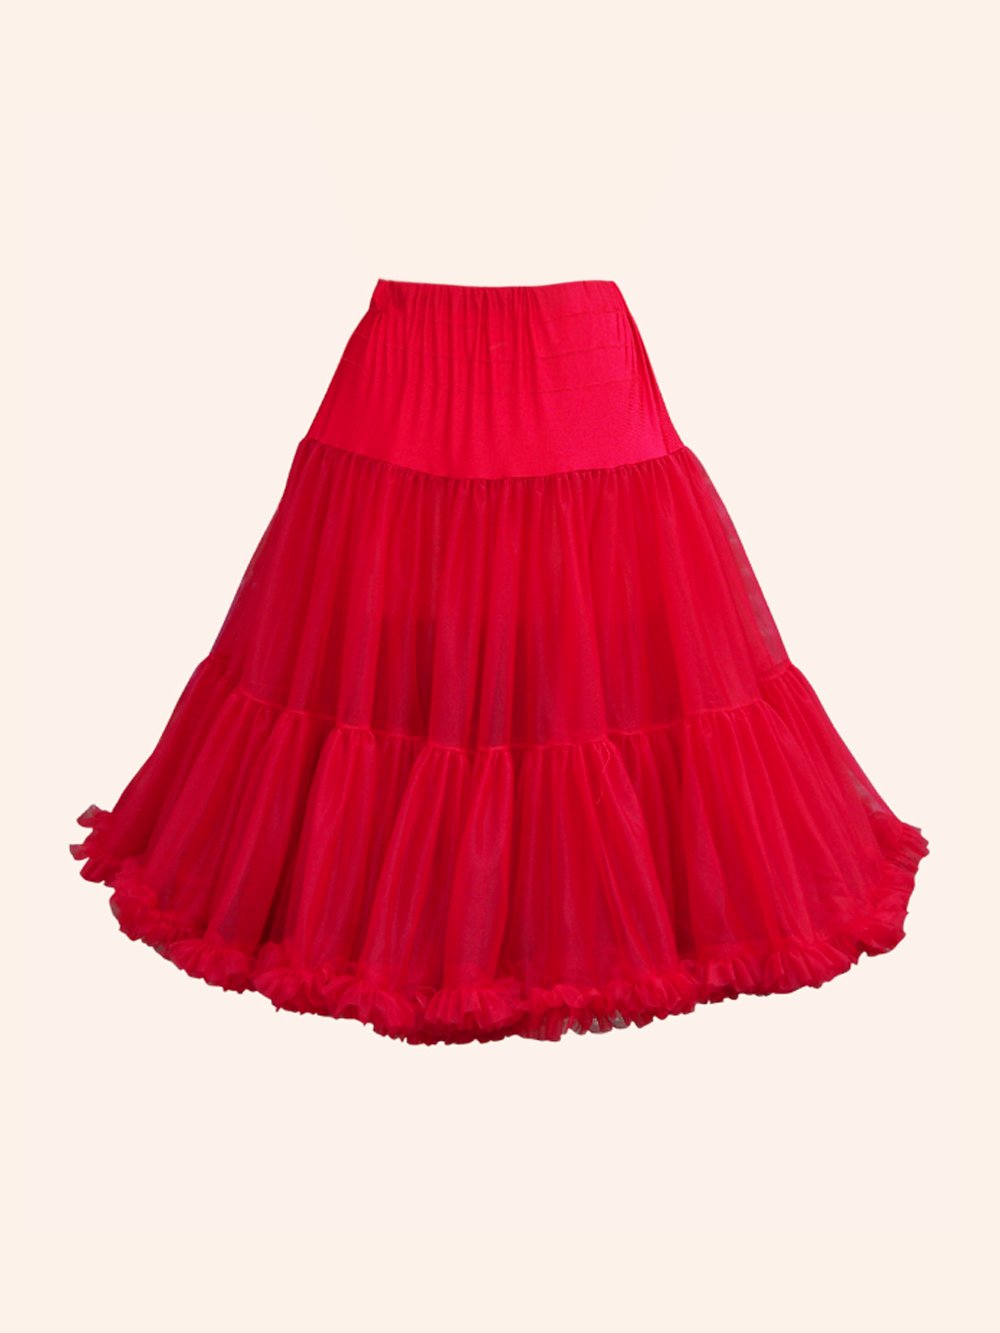 View All Women   View All Petticoats   View All Red Women